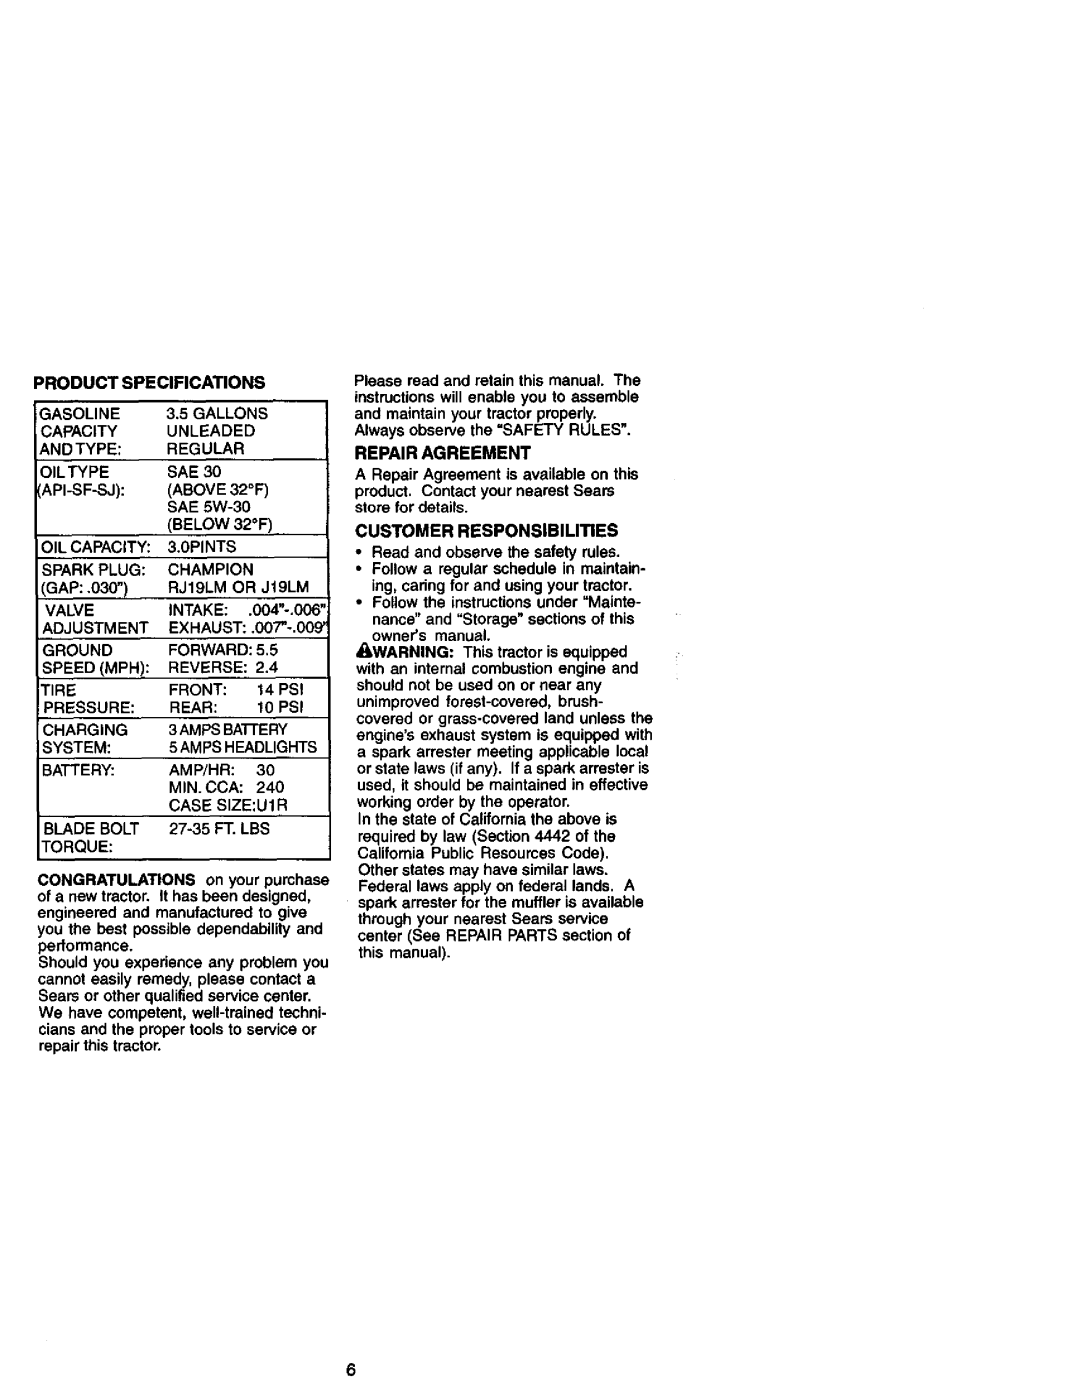 Craftsman 917.27182 Product Specifications, Please read and retain this manual. The, Repair Agreement, Gap 